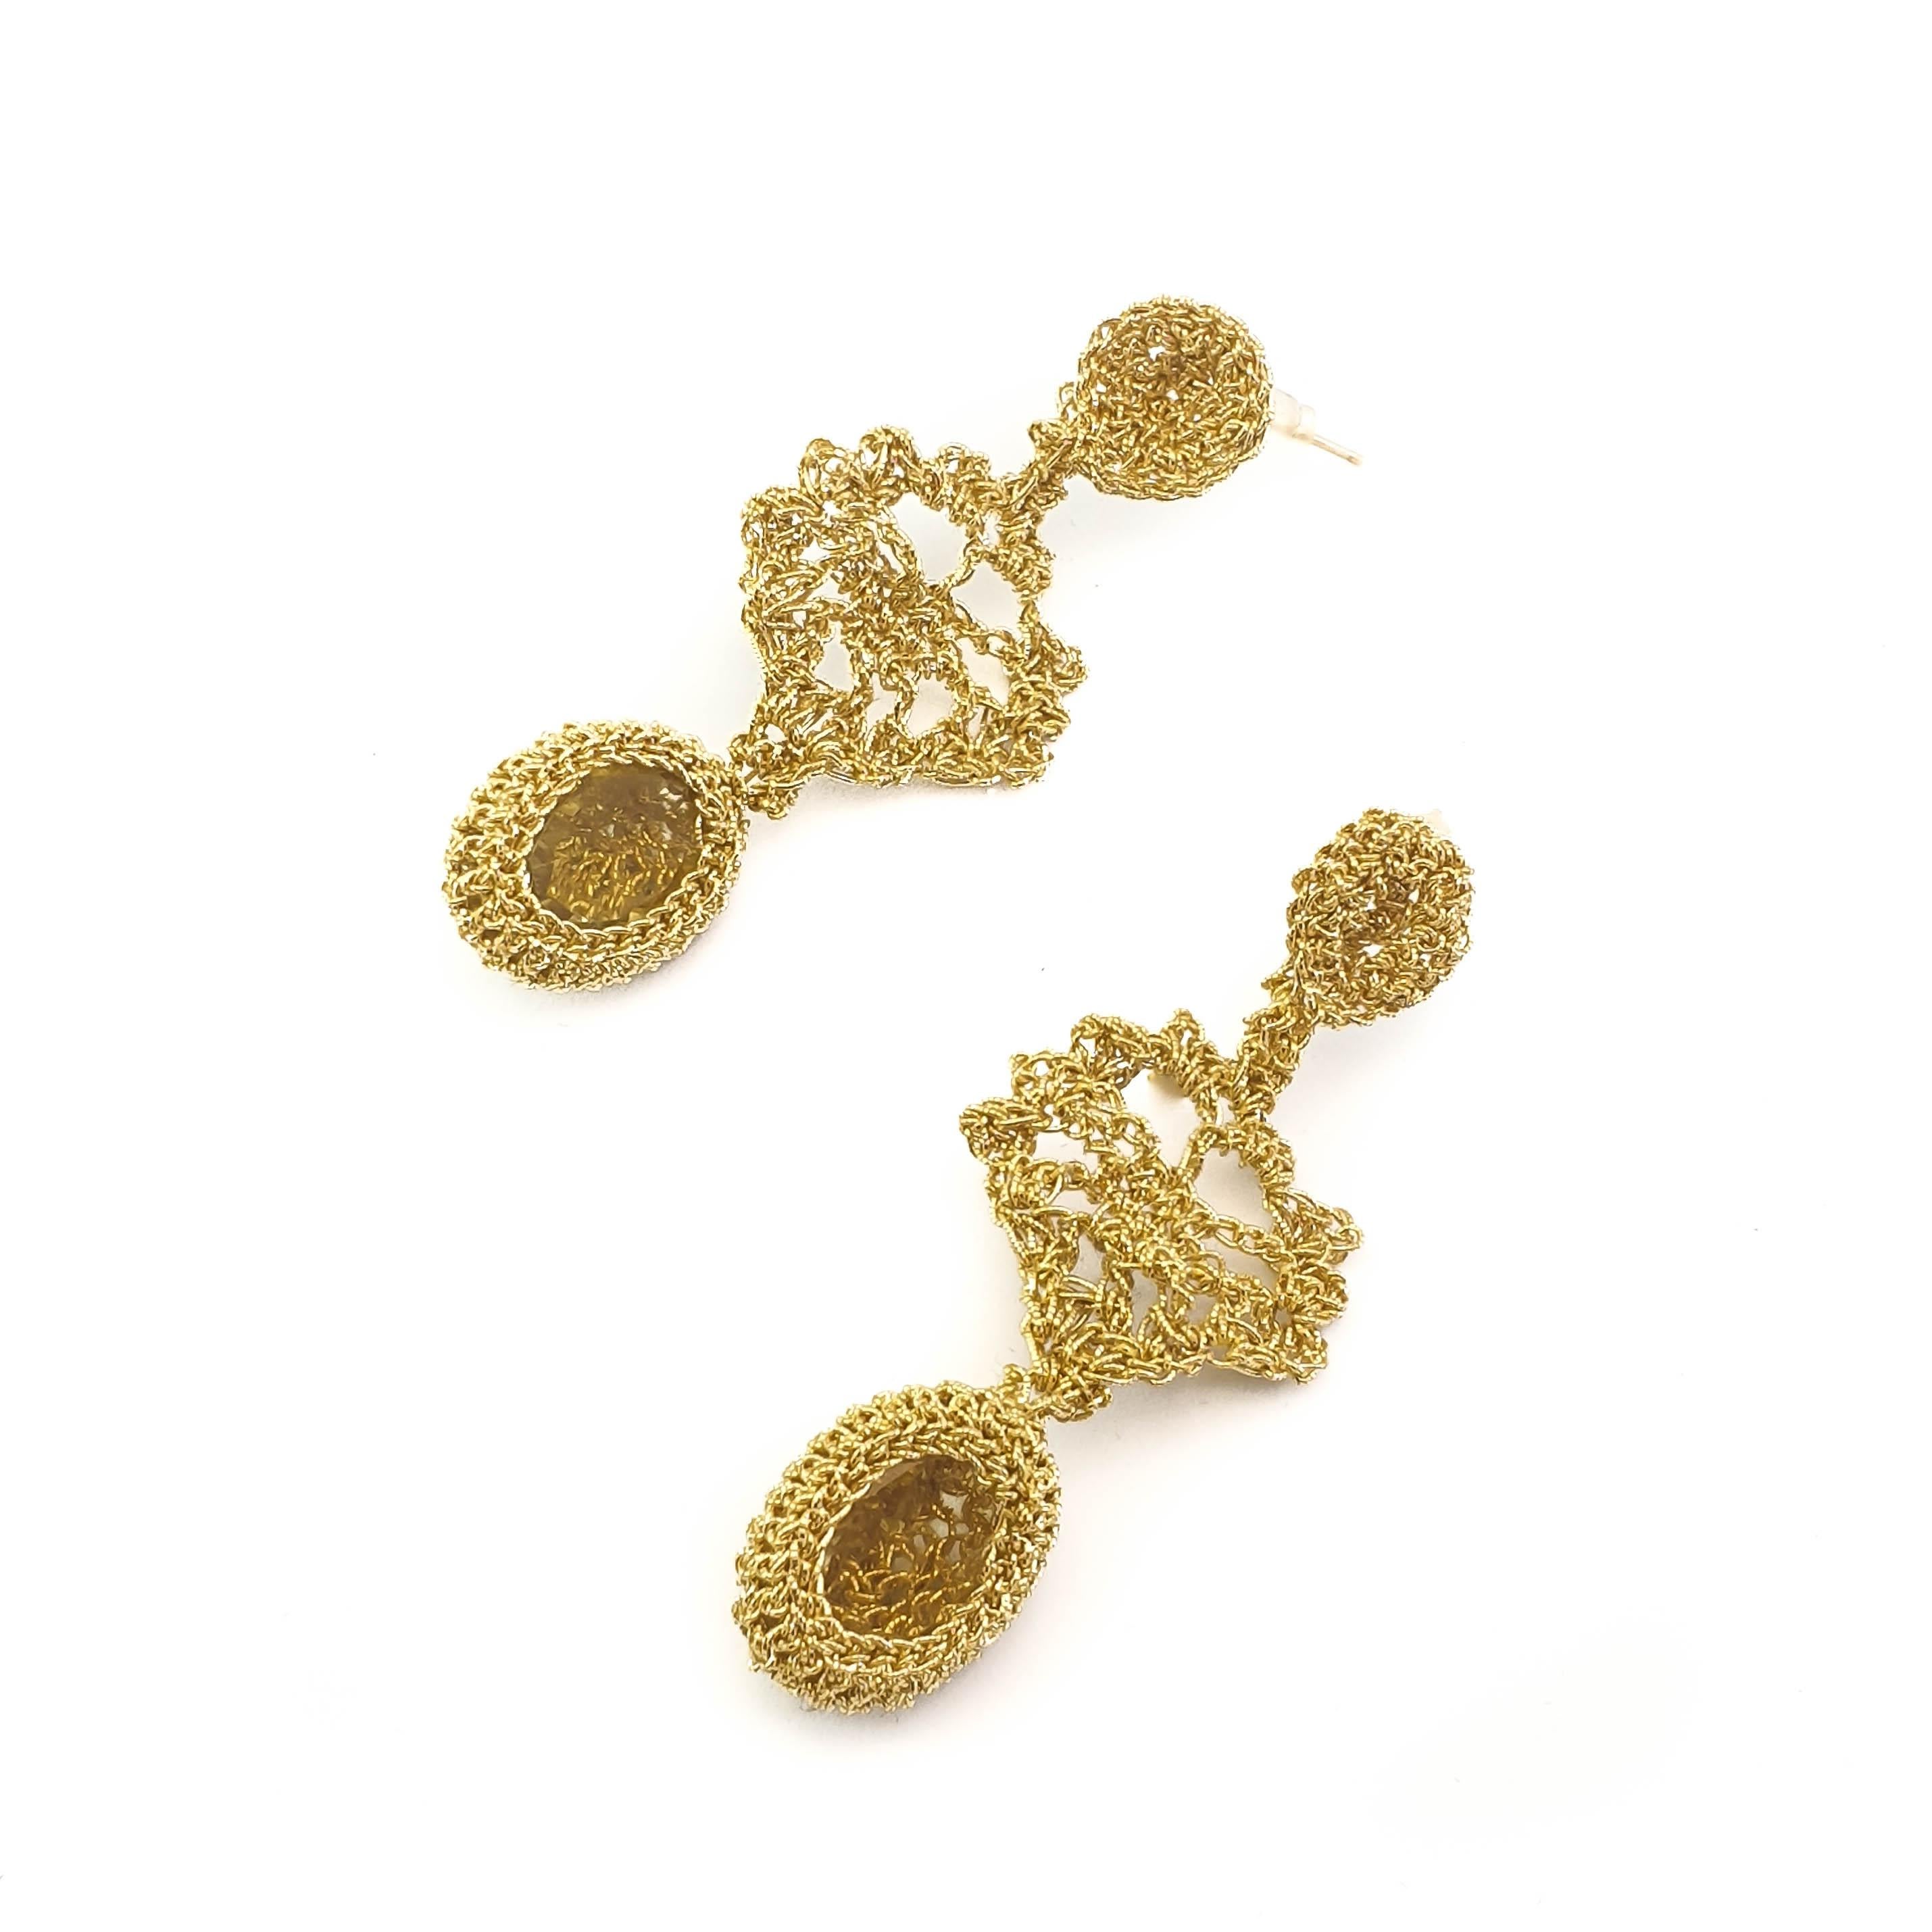 Beautifully crafted hand crochet gold thread  (2.97 grams gold) earrings with light golden citrines (weighing 2.3 grams/11.5 carats). The intricate stitching can be seen through the stones.

Shenhav's inspiration comes from the world's wide-open